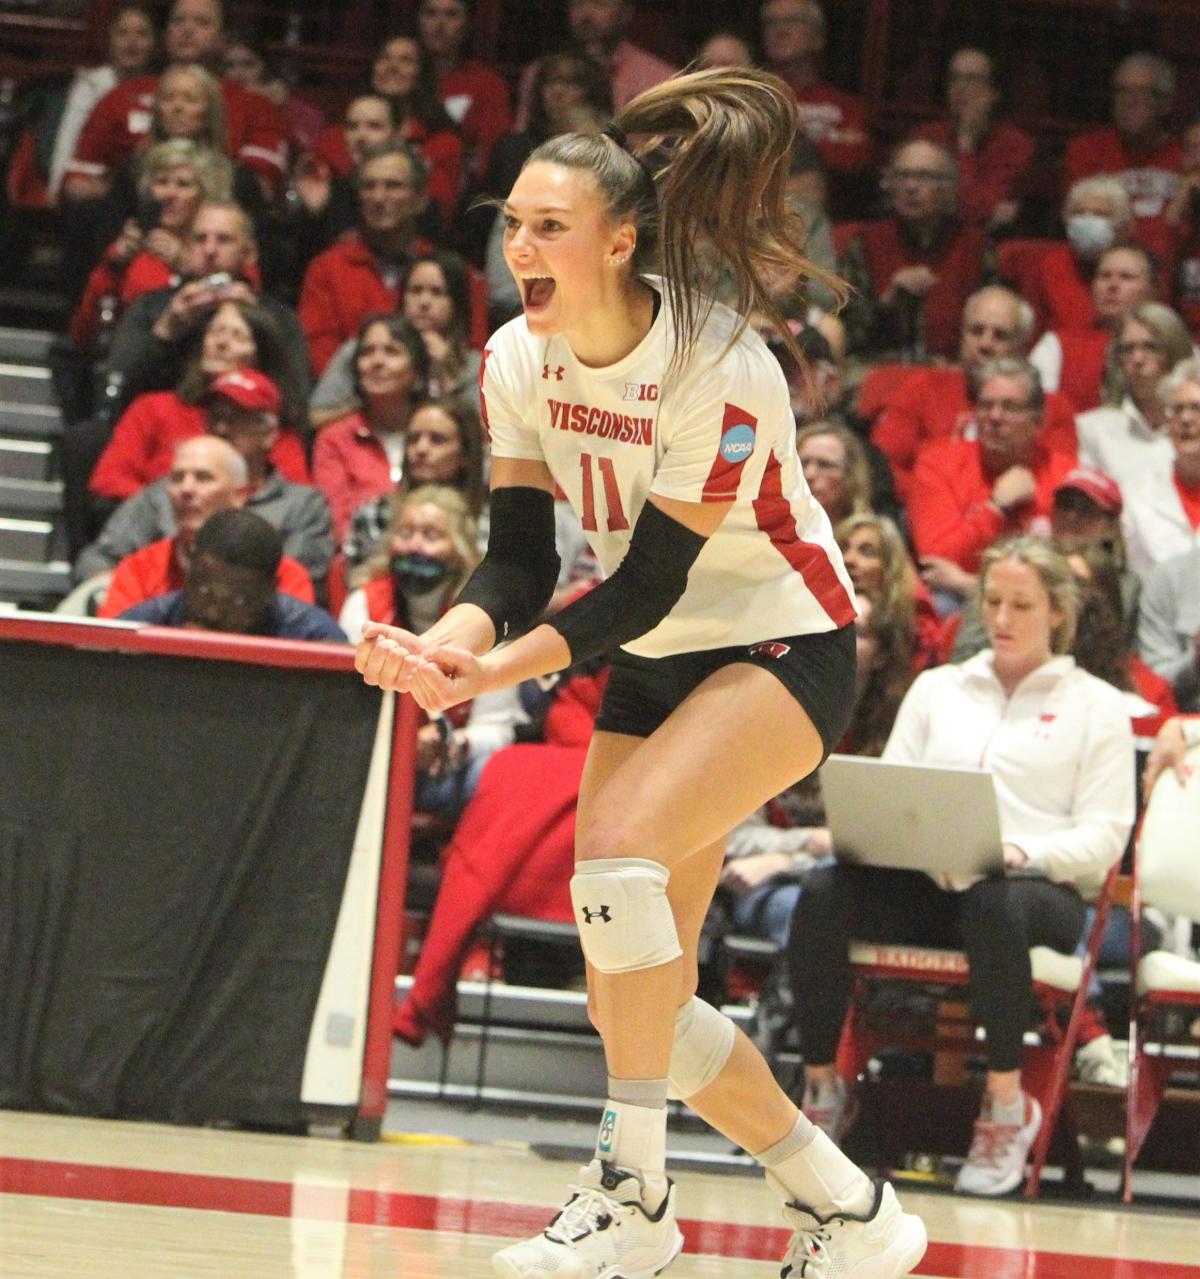 The Wisconsin volleyball team defeats TCU to advance to the Sweet 16